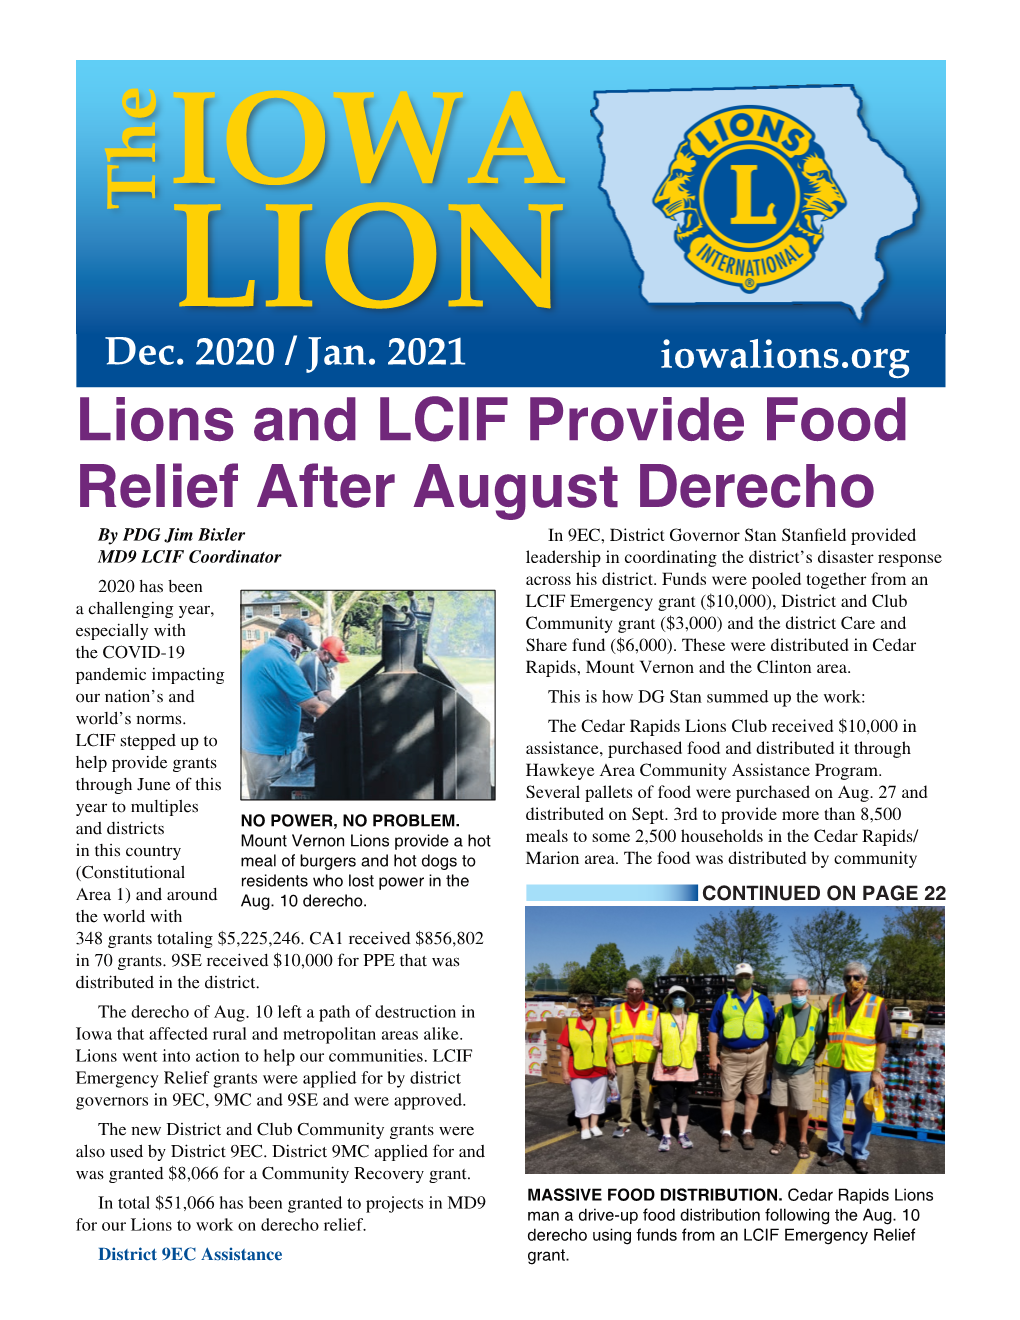 Lions and LCIF Provide Food Relief After August Derecho